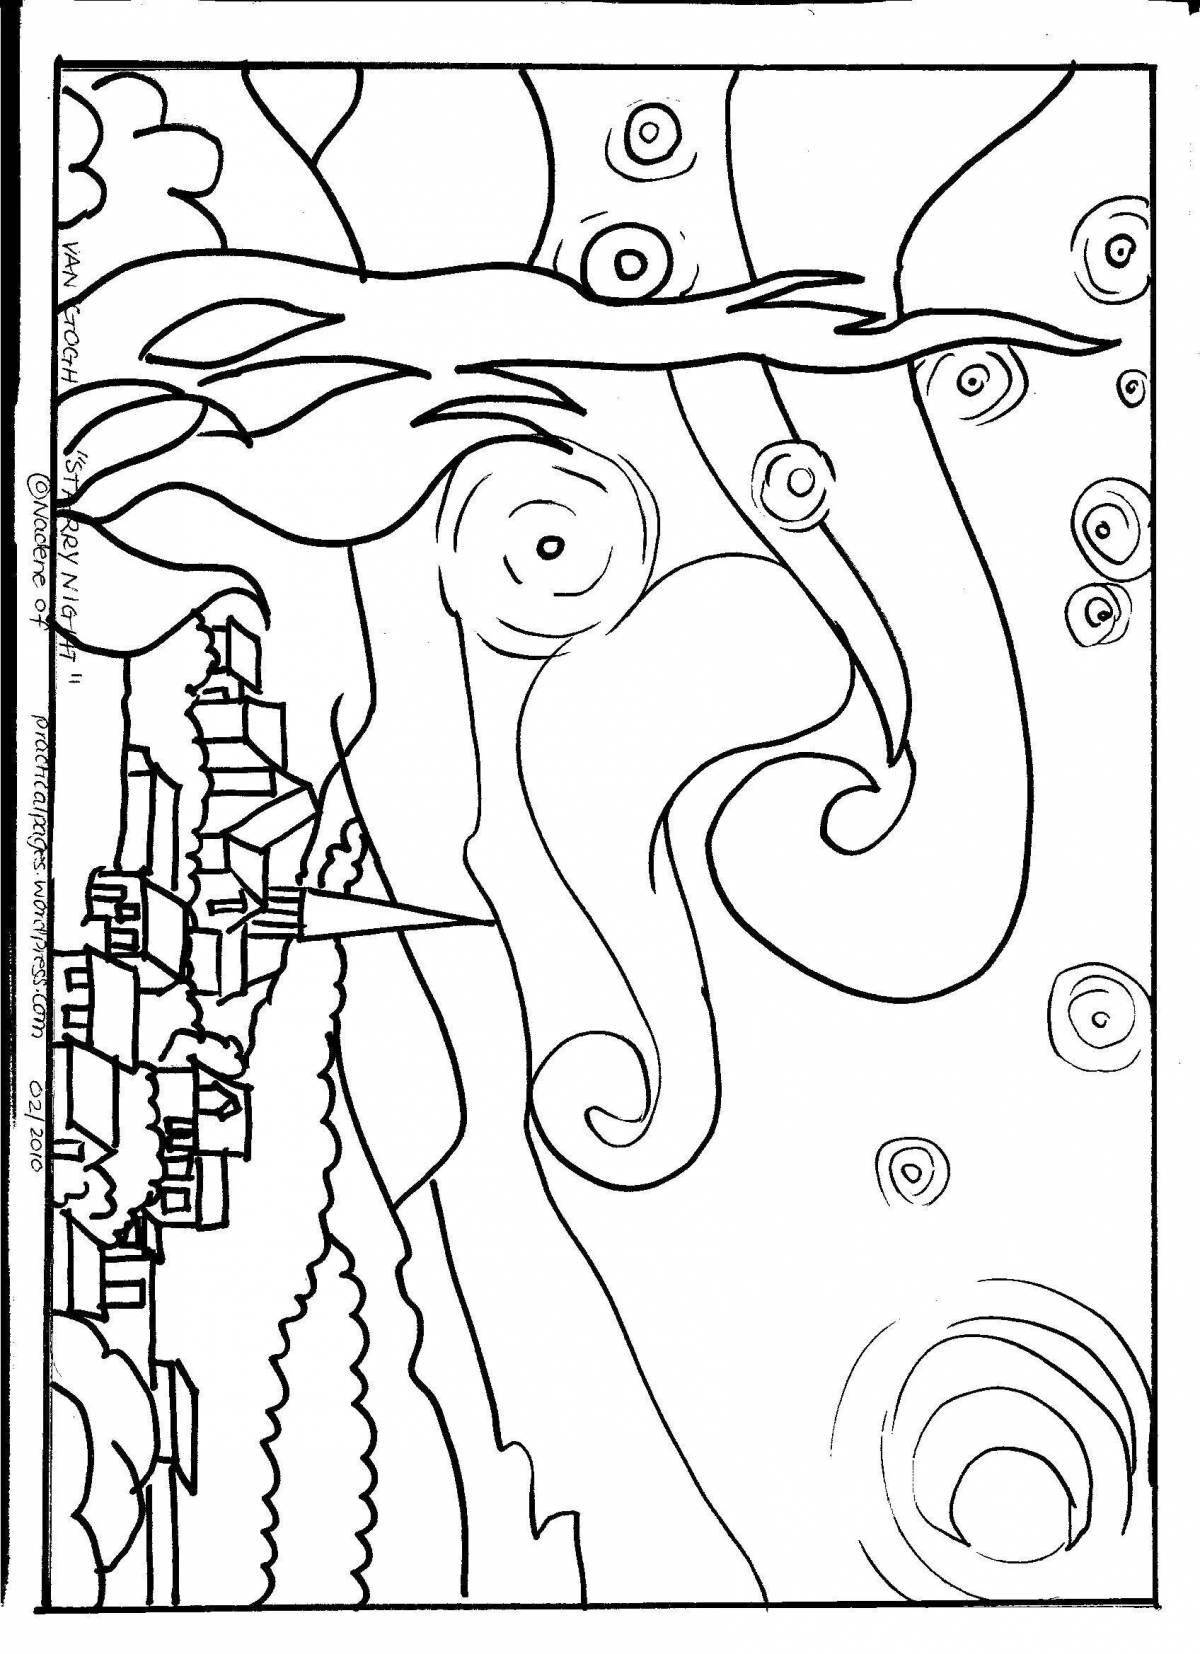 Charming starry night coloring page